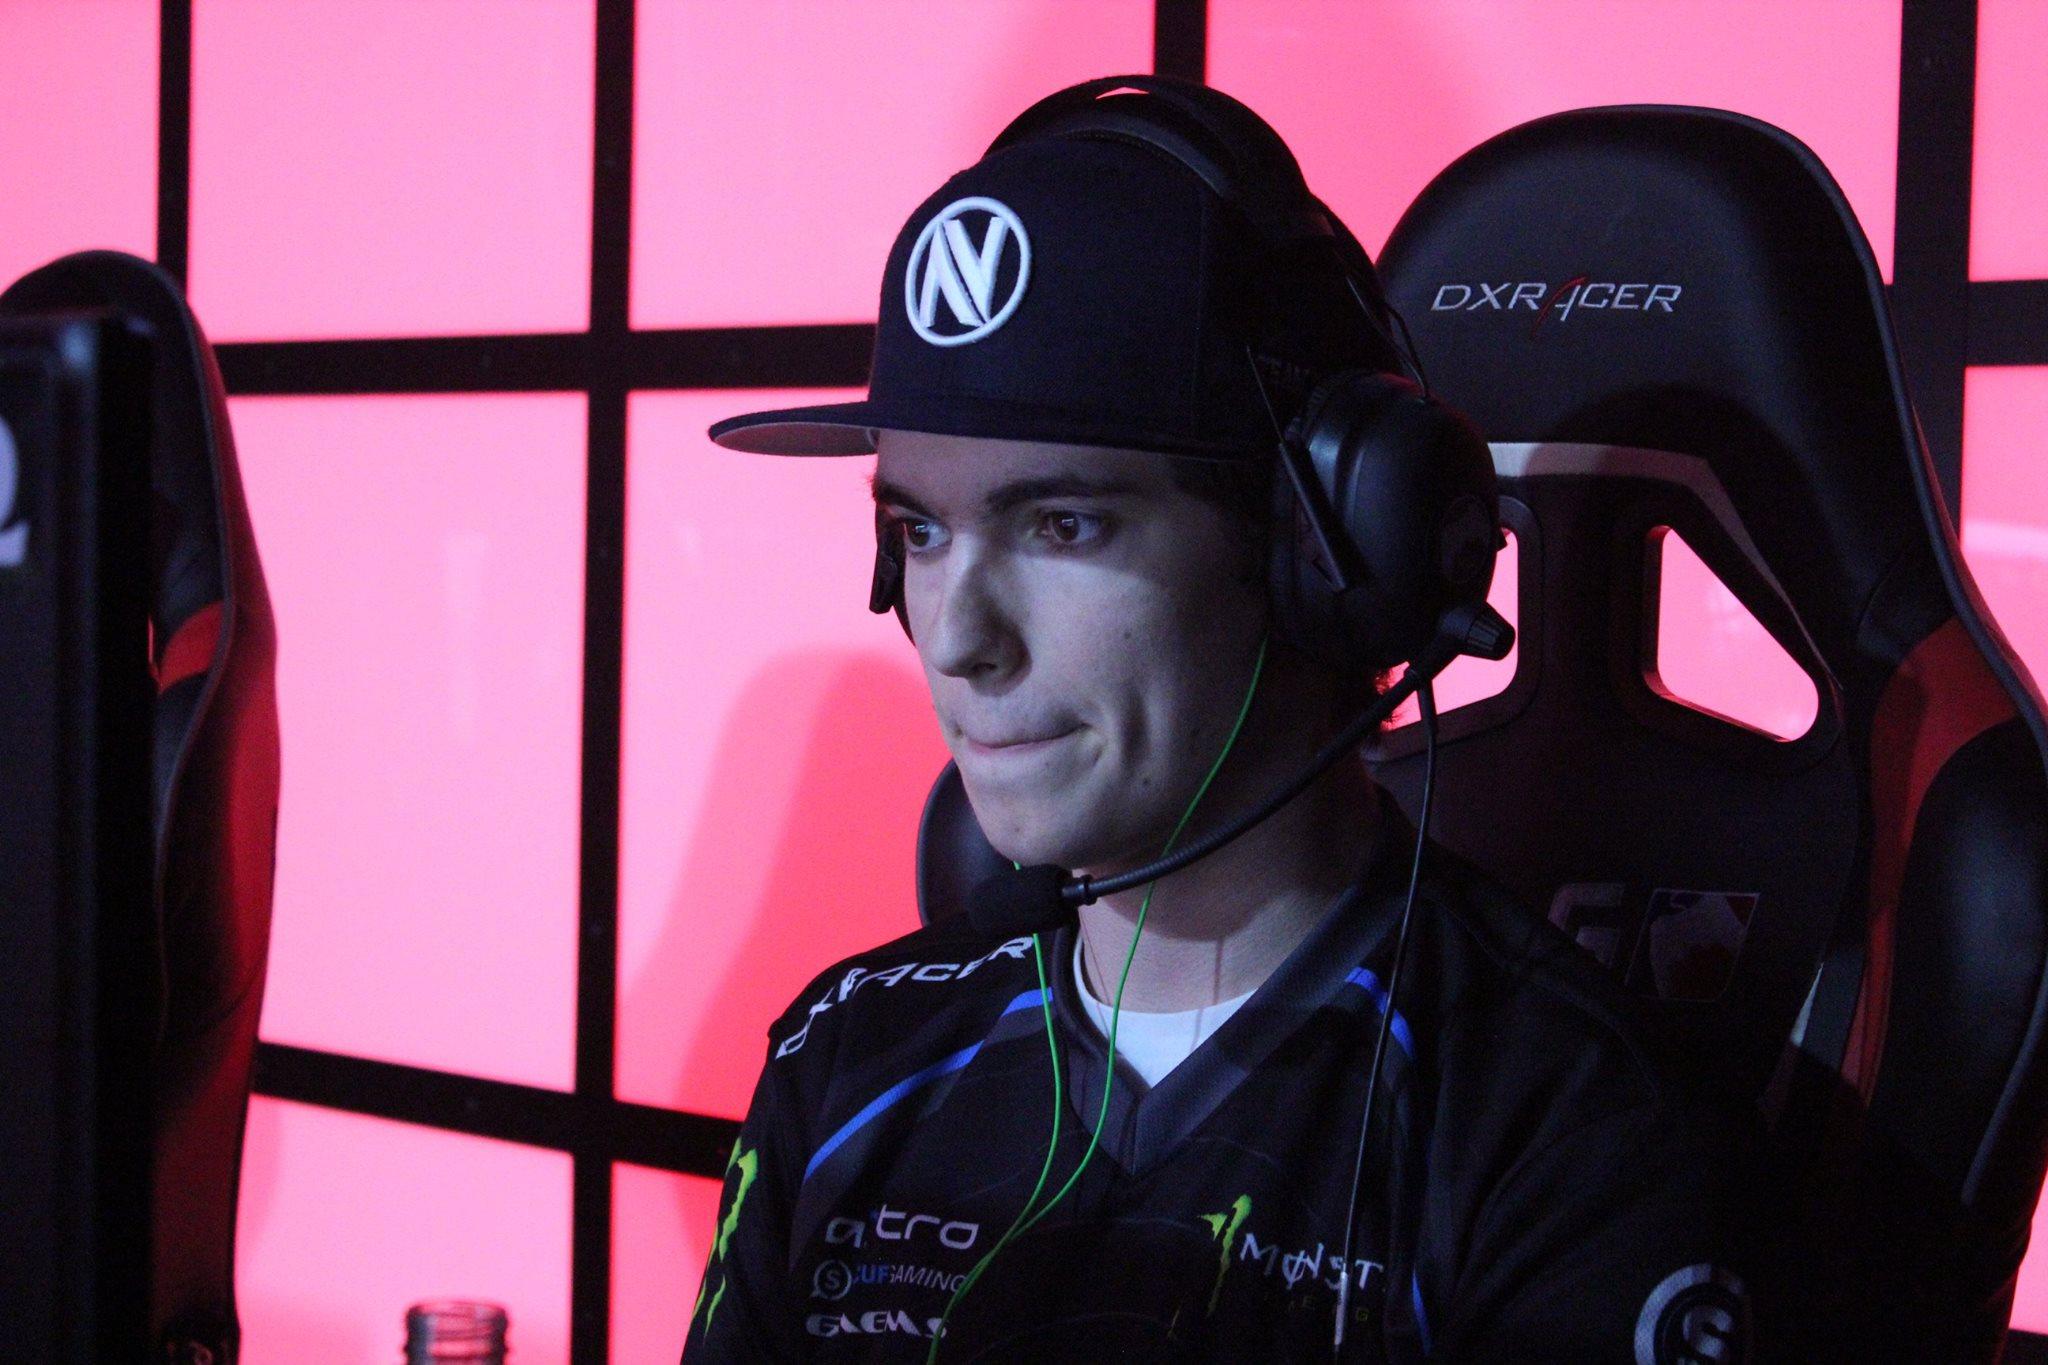 Octane in Envy jersey at MLG Season 3 Playoffs 2015.